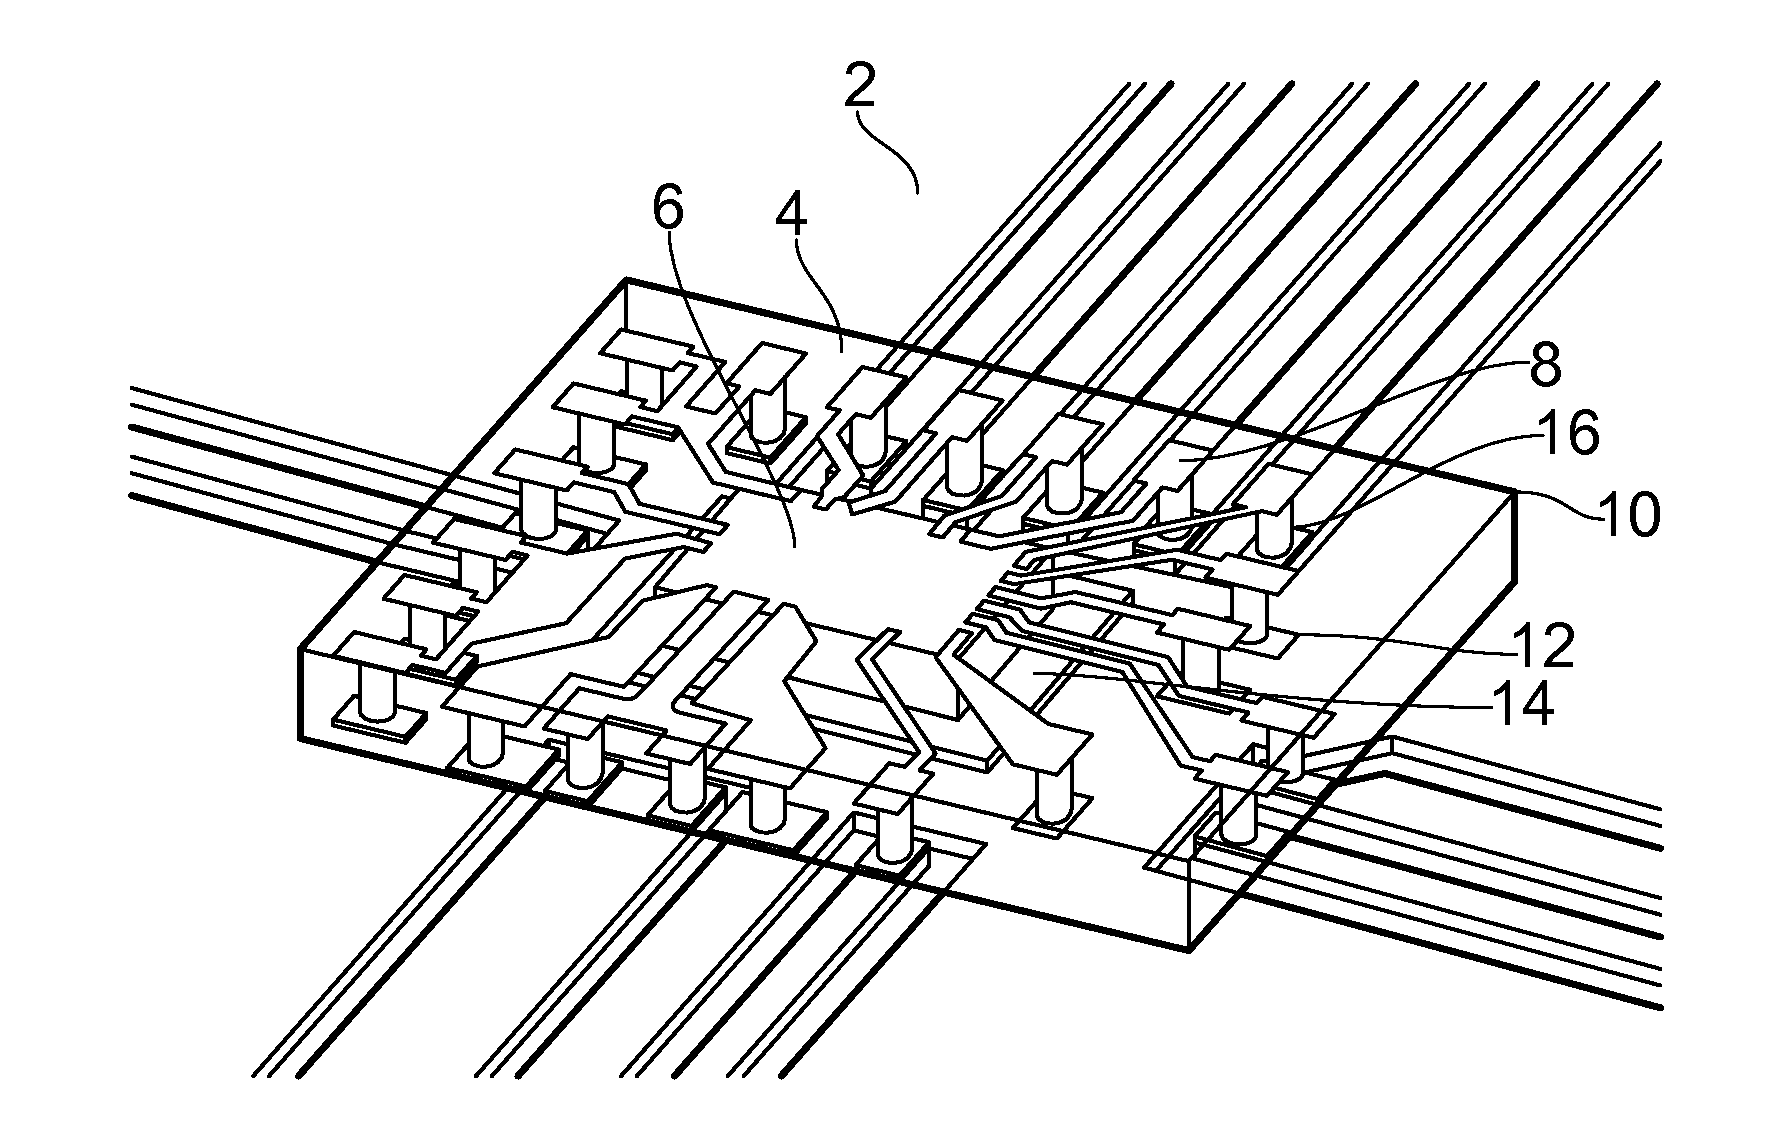 Semiconductor package with improved thermal properties